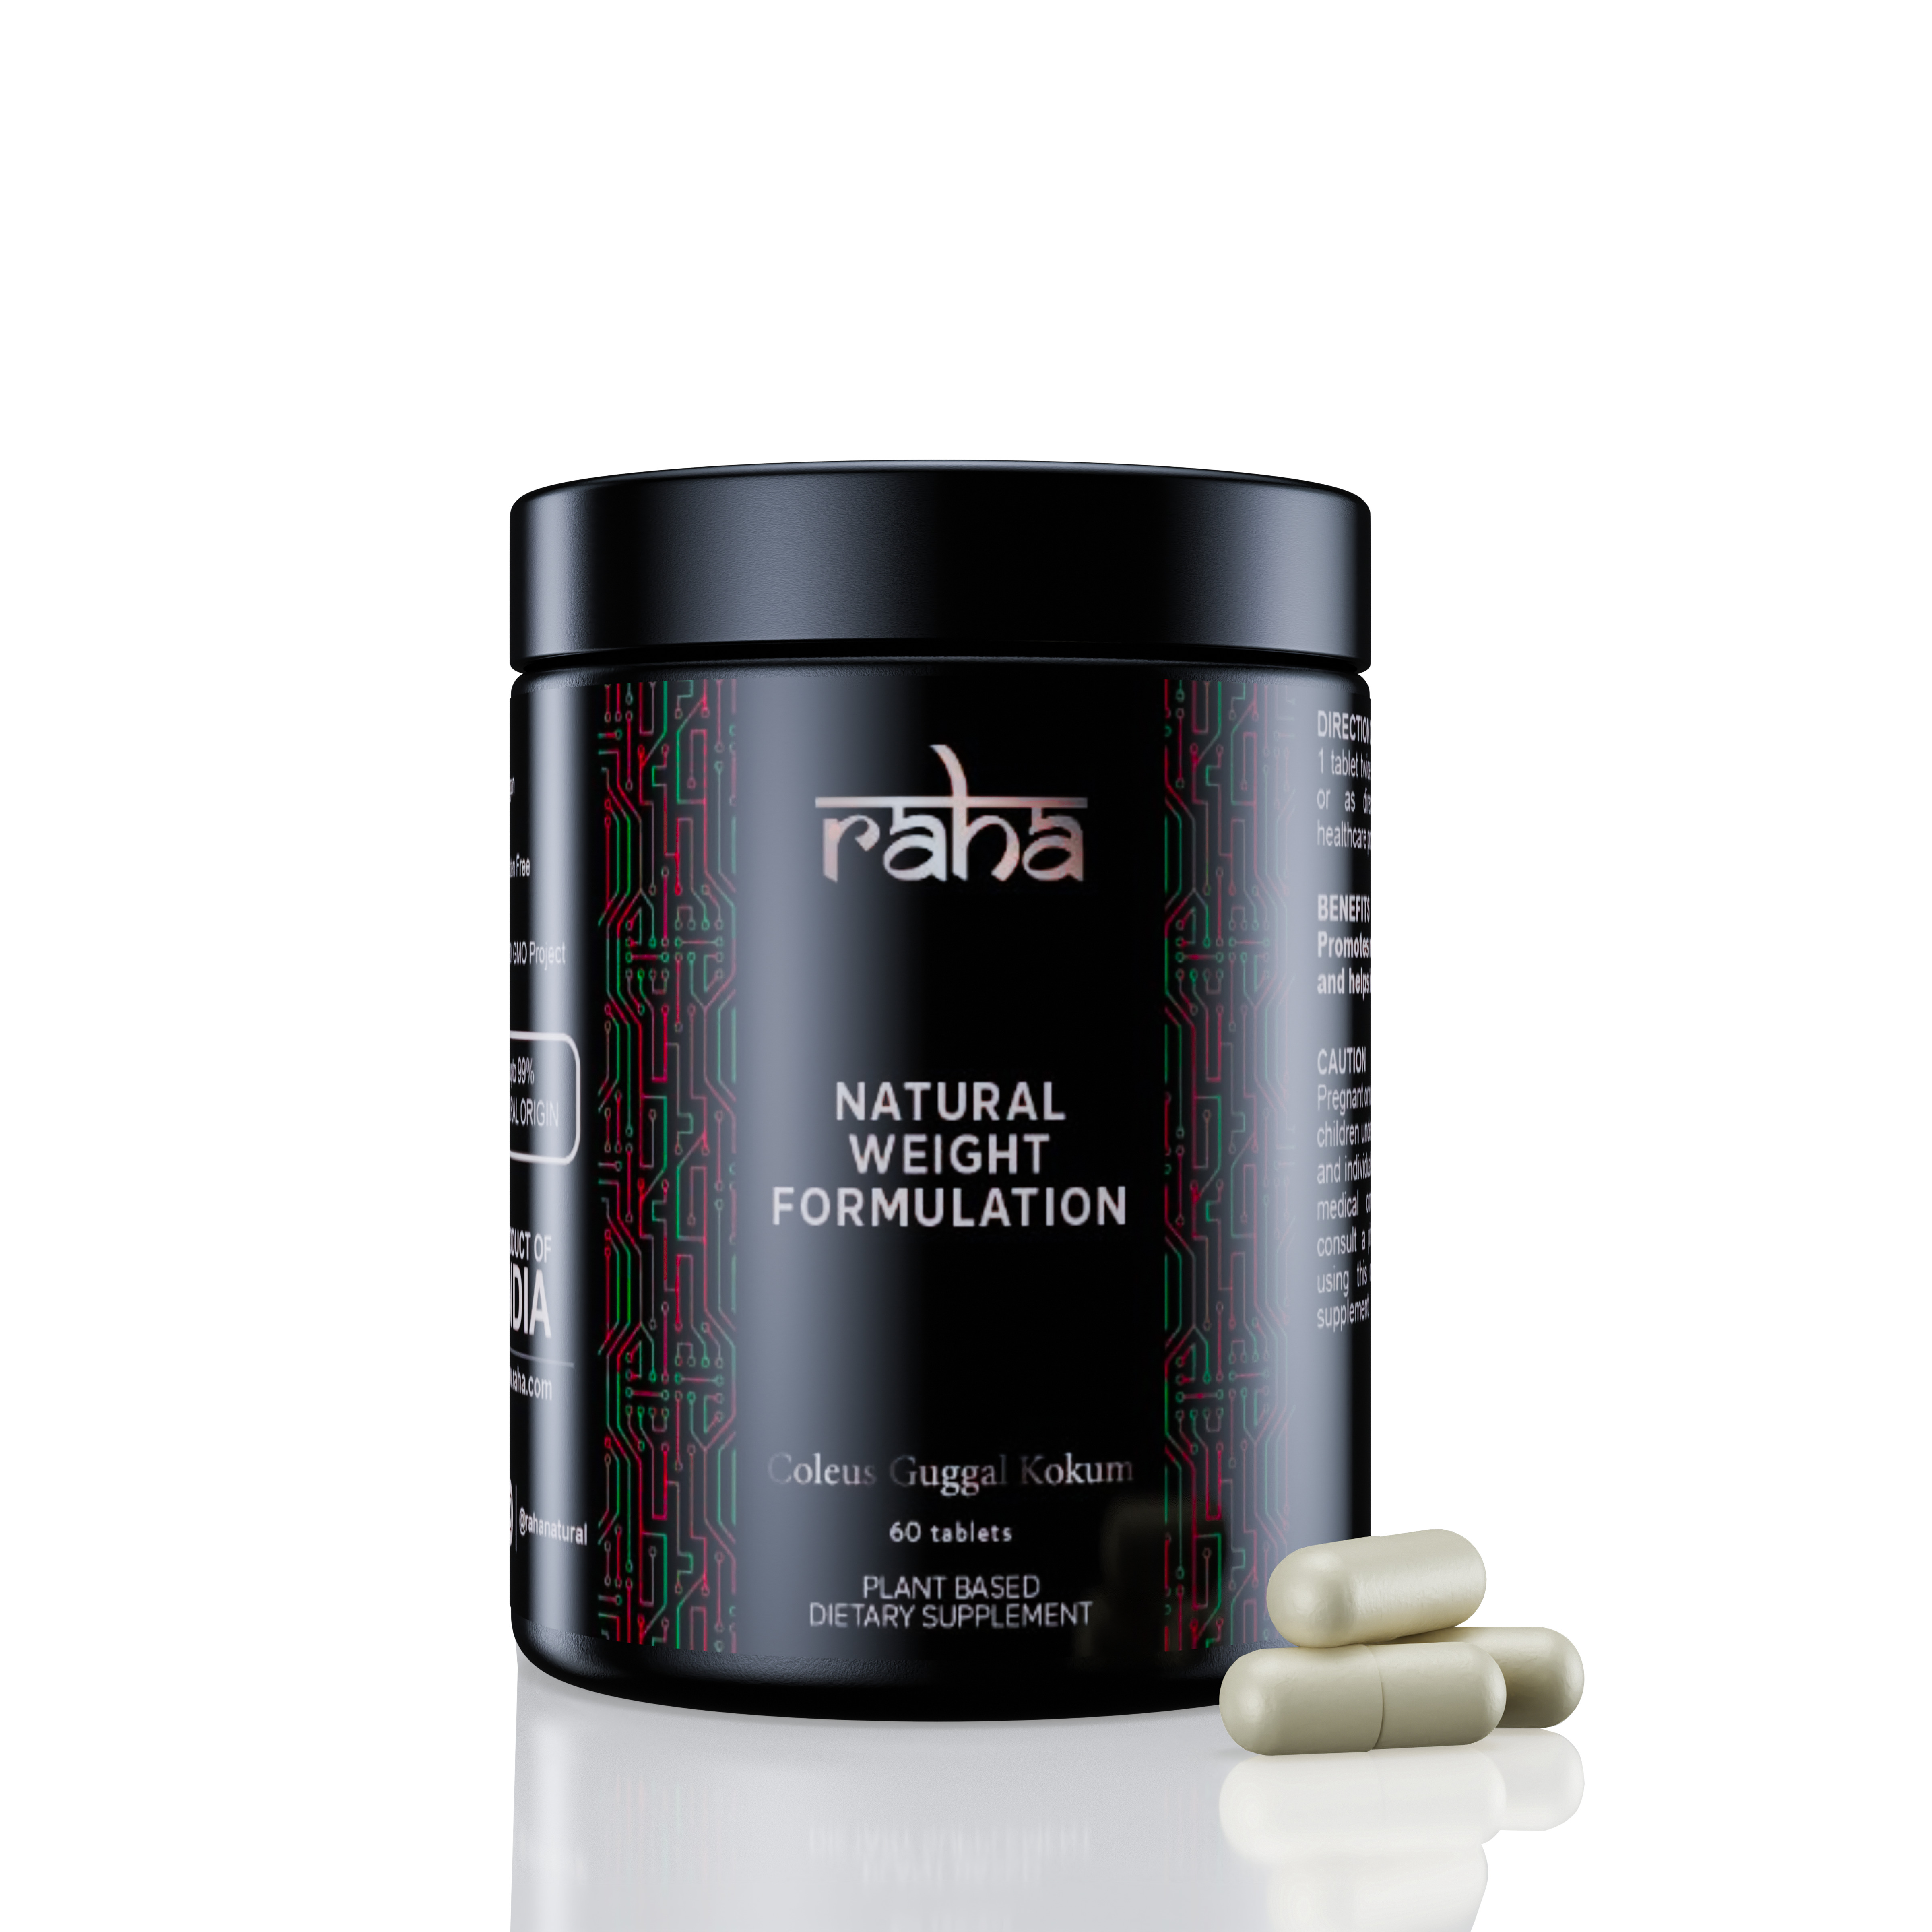 Raha natural weight formulation for managing and reducing weight